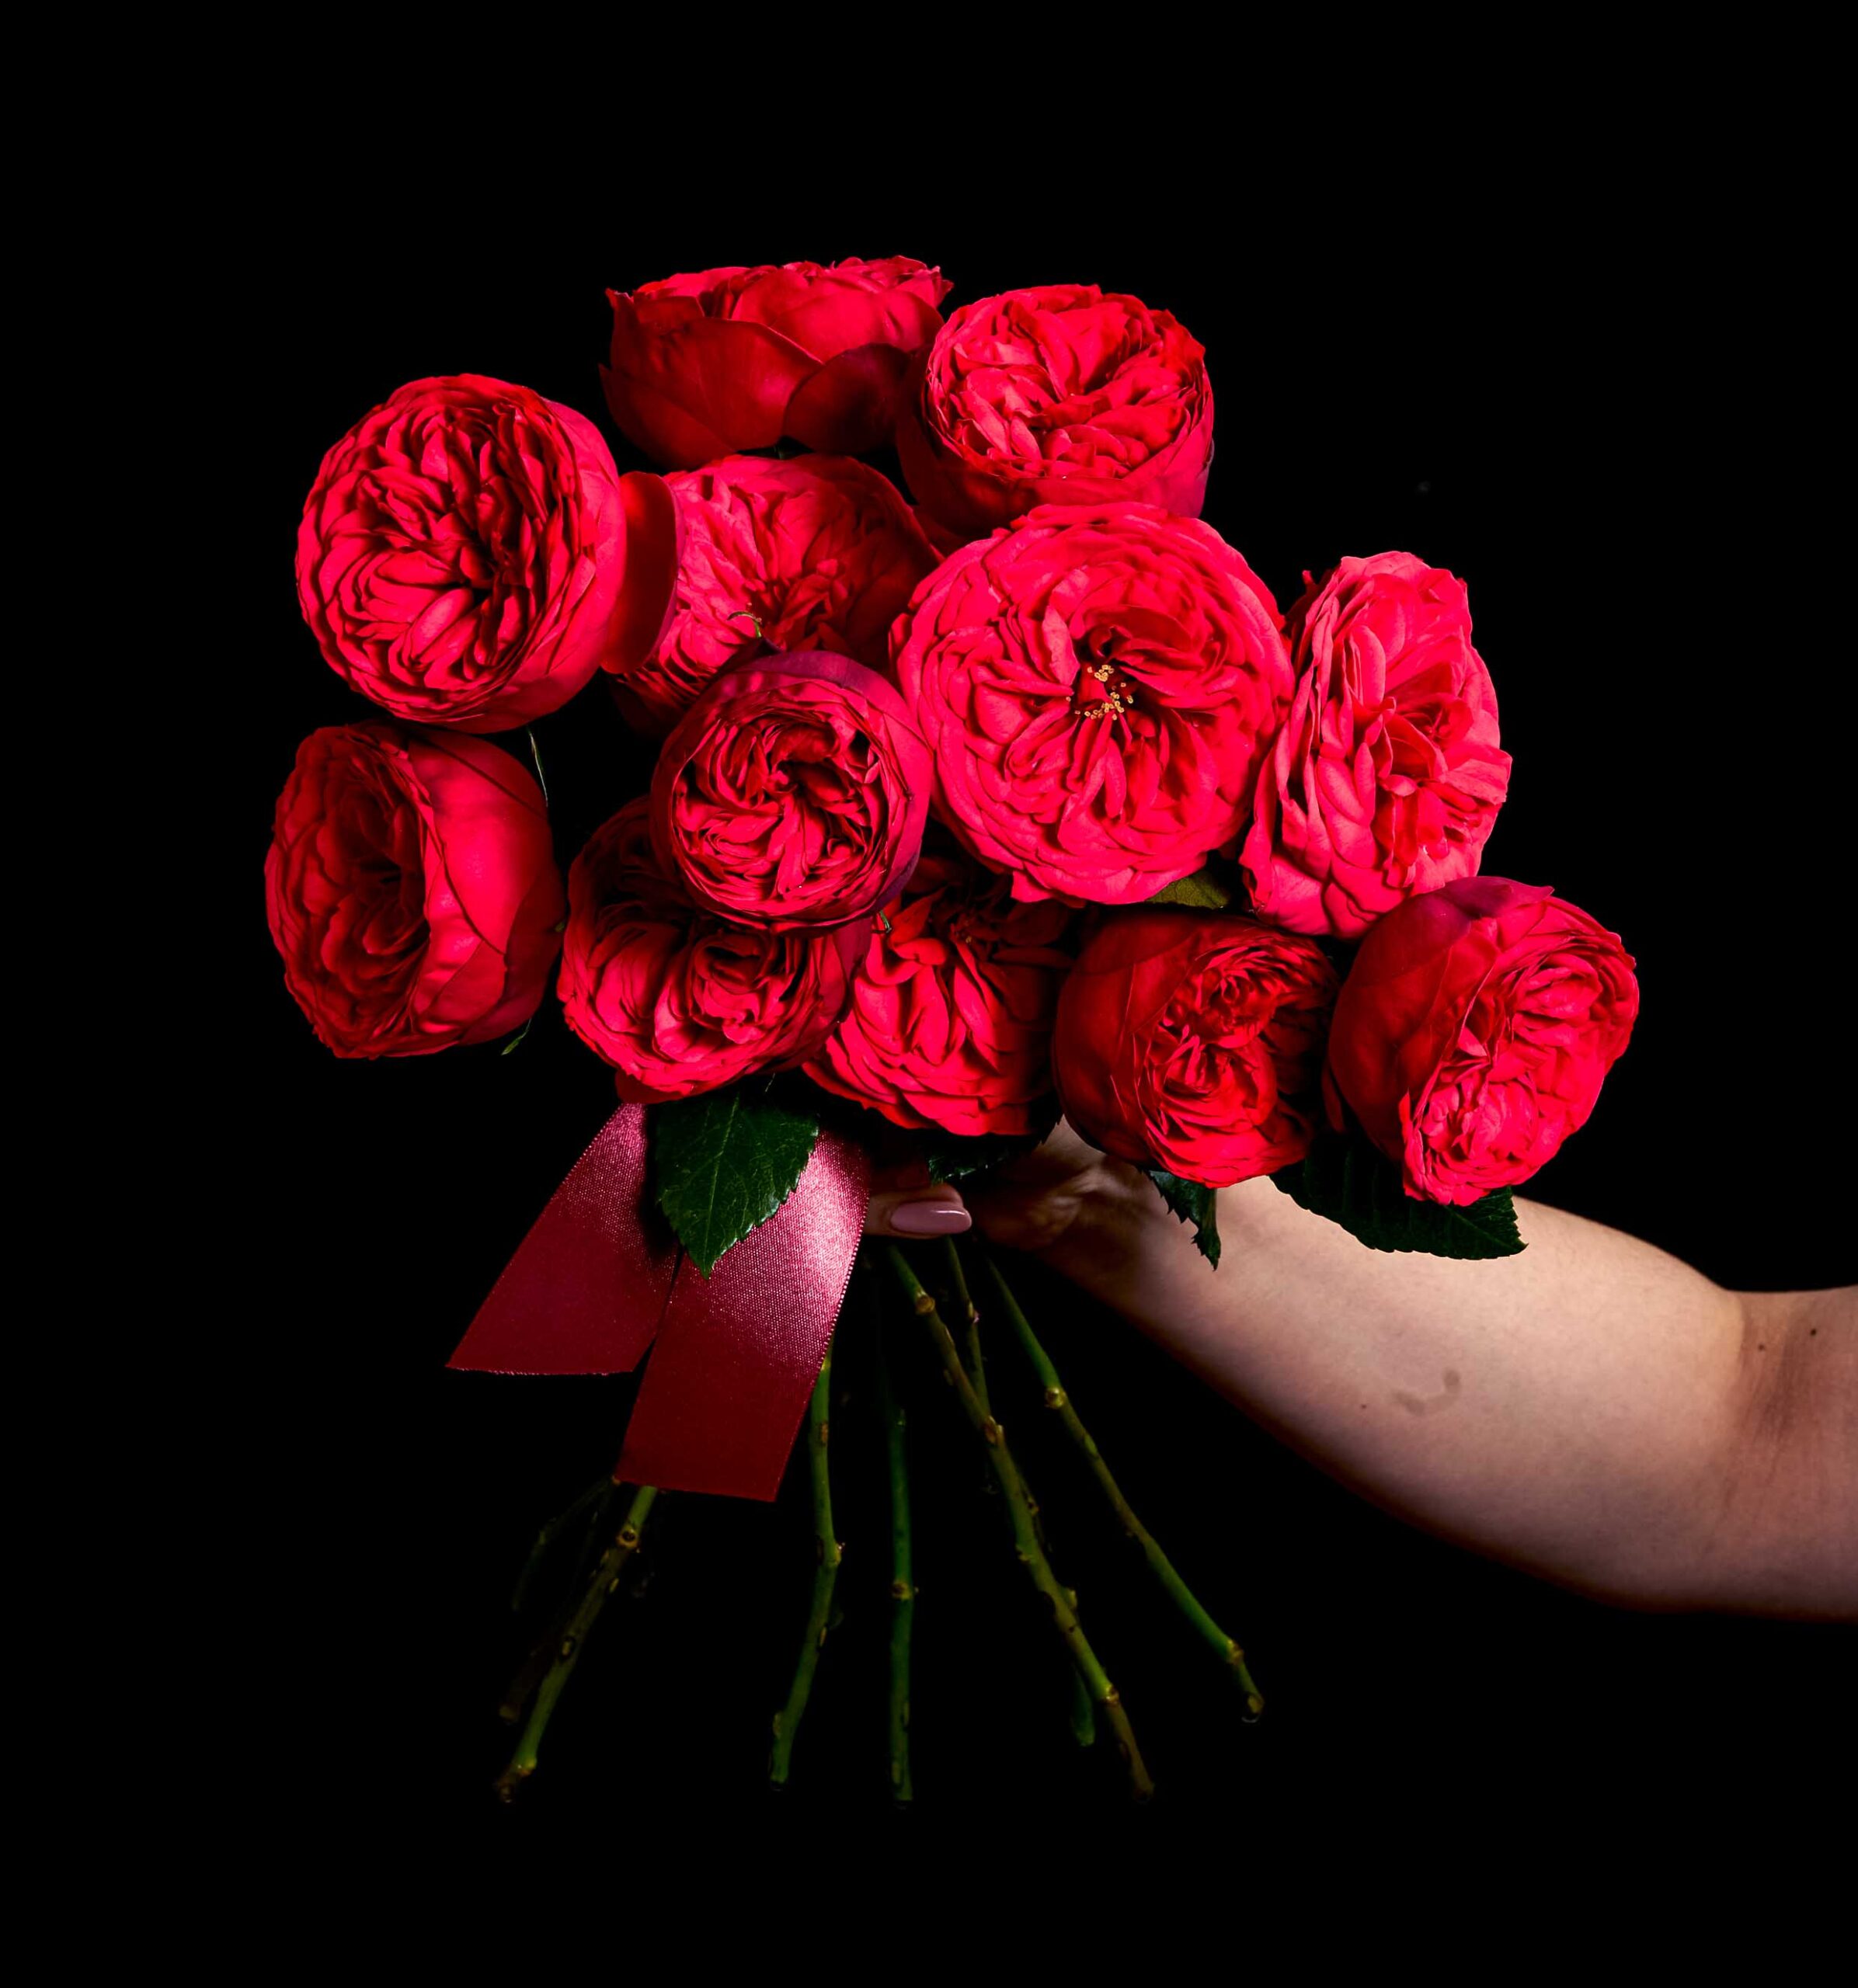 A bouquet of red roses in a hand